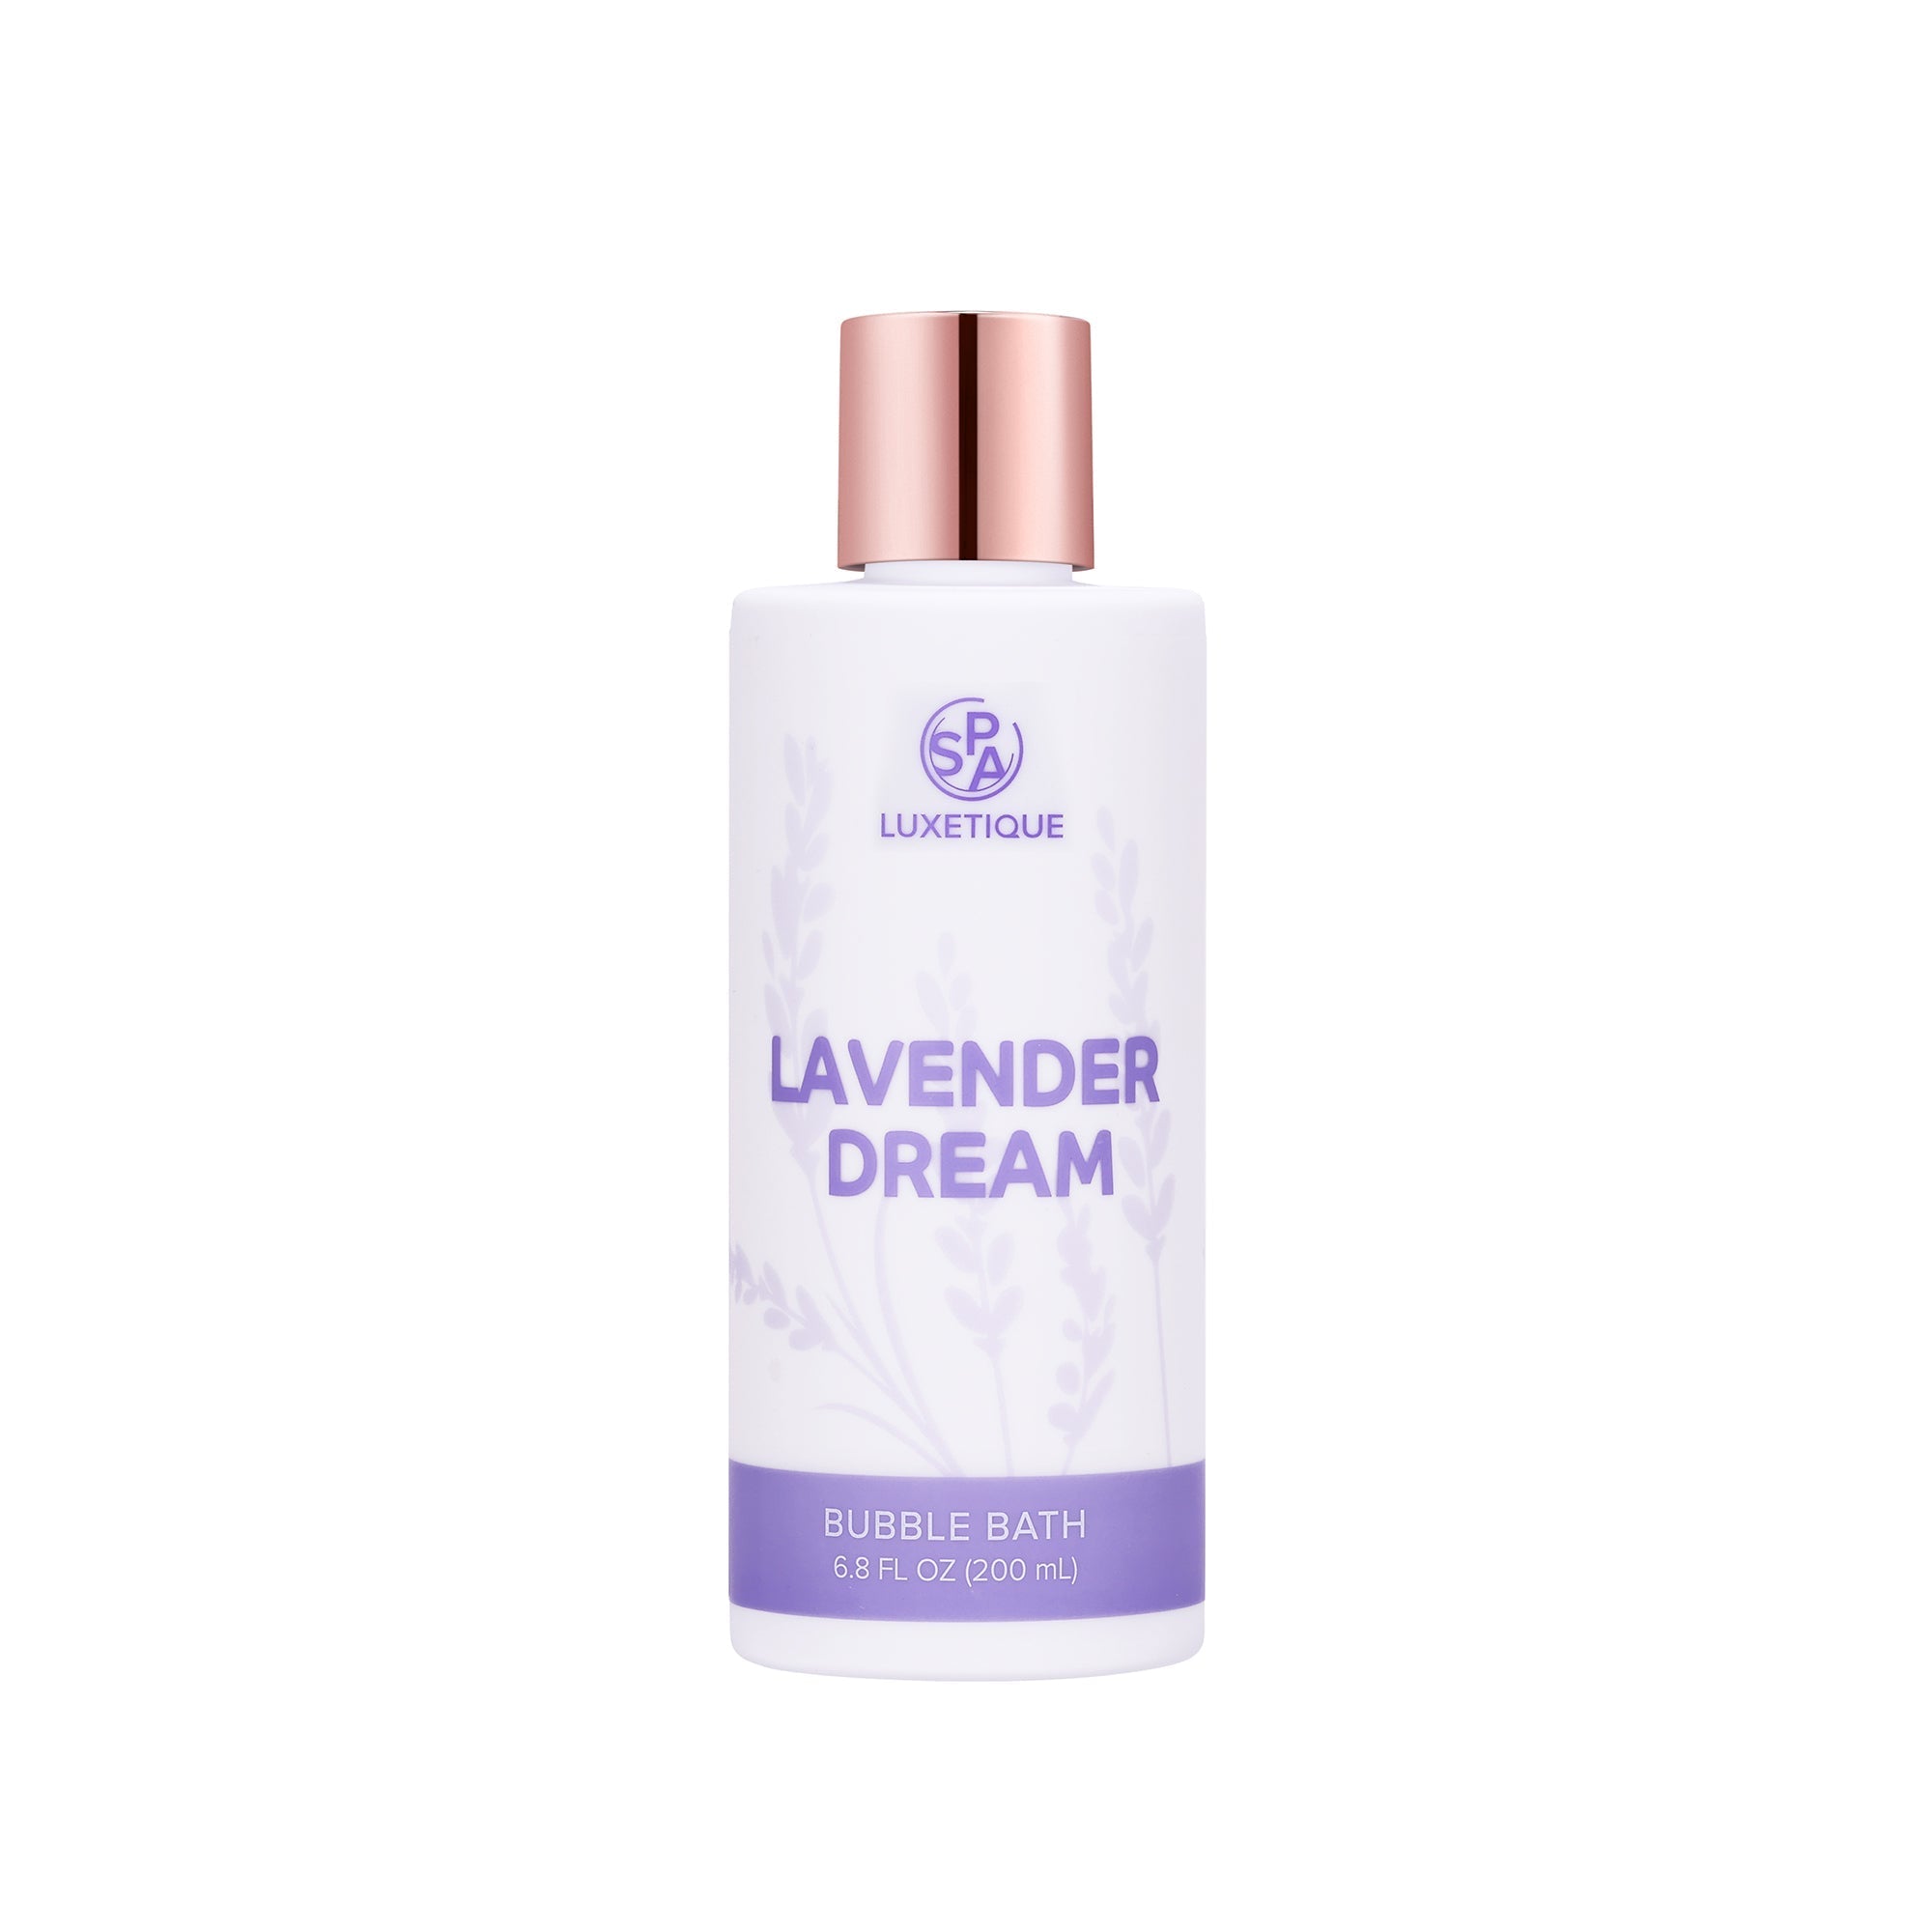 SPA Luxetique Lavender Dream Bubble Bath. Enriched with natural lavender essence, this bubble bath is crafted to enhance your self-care routine. Our carefully curated natural ingredients ensure your skin is nourished while providing a serene and calming aroma.